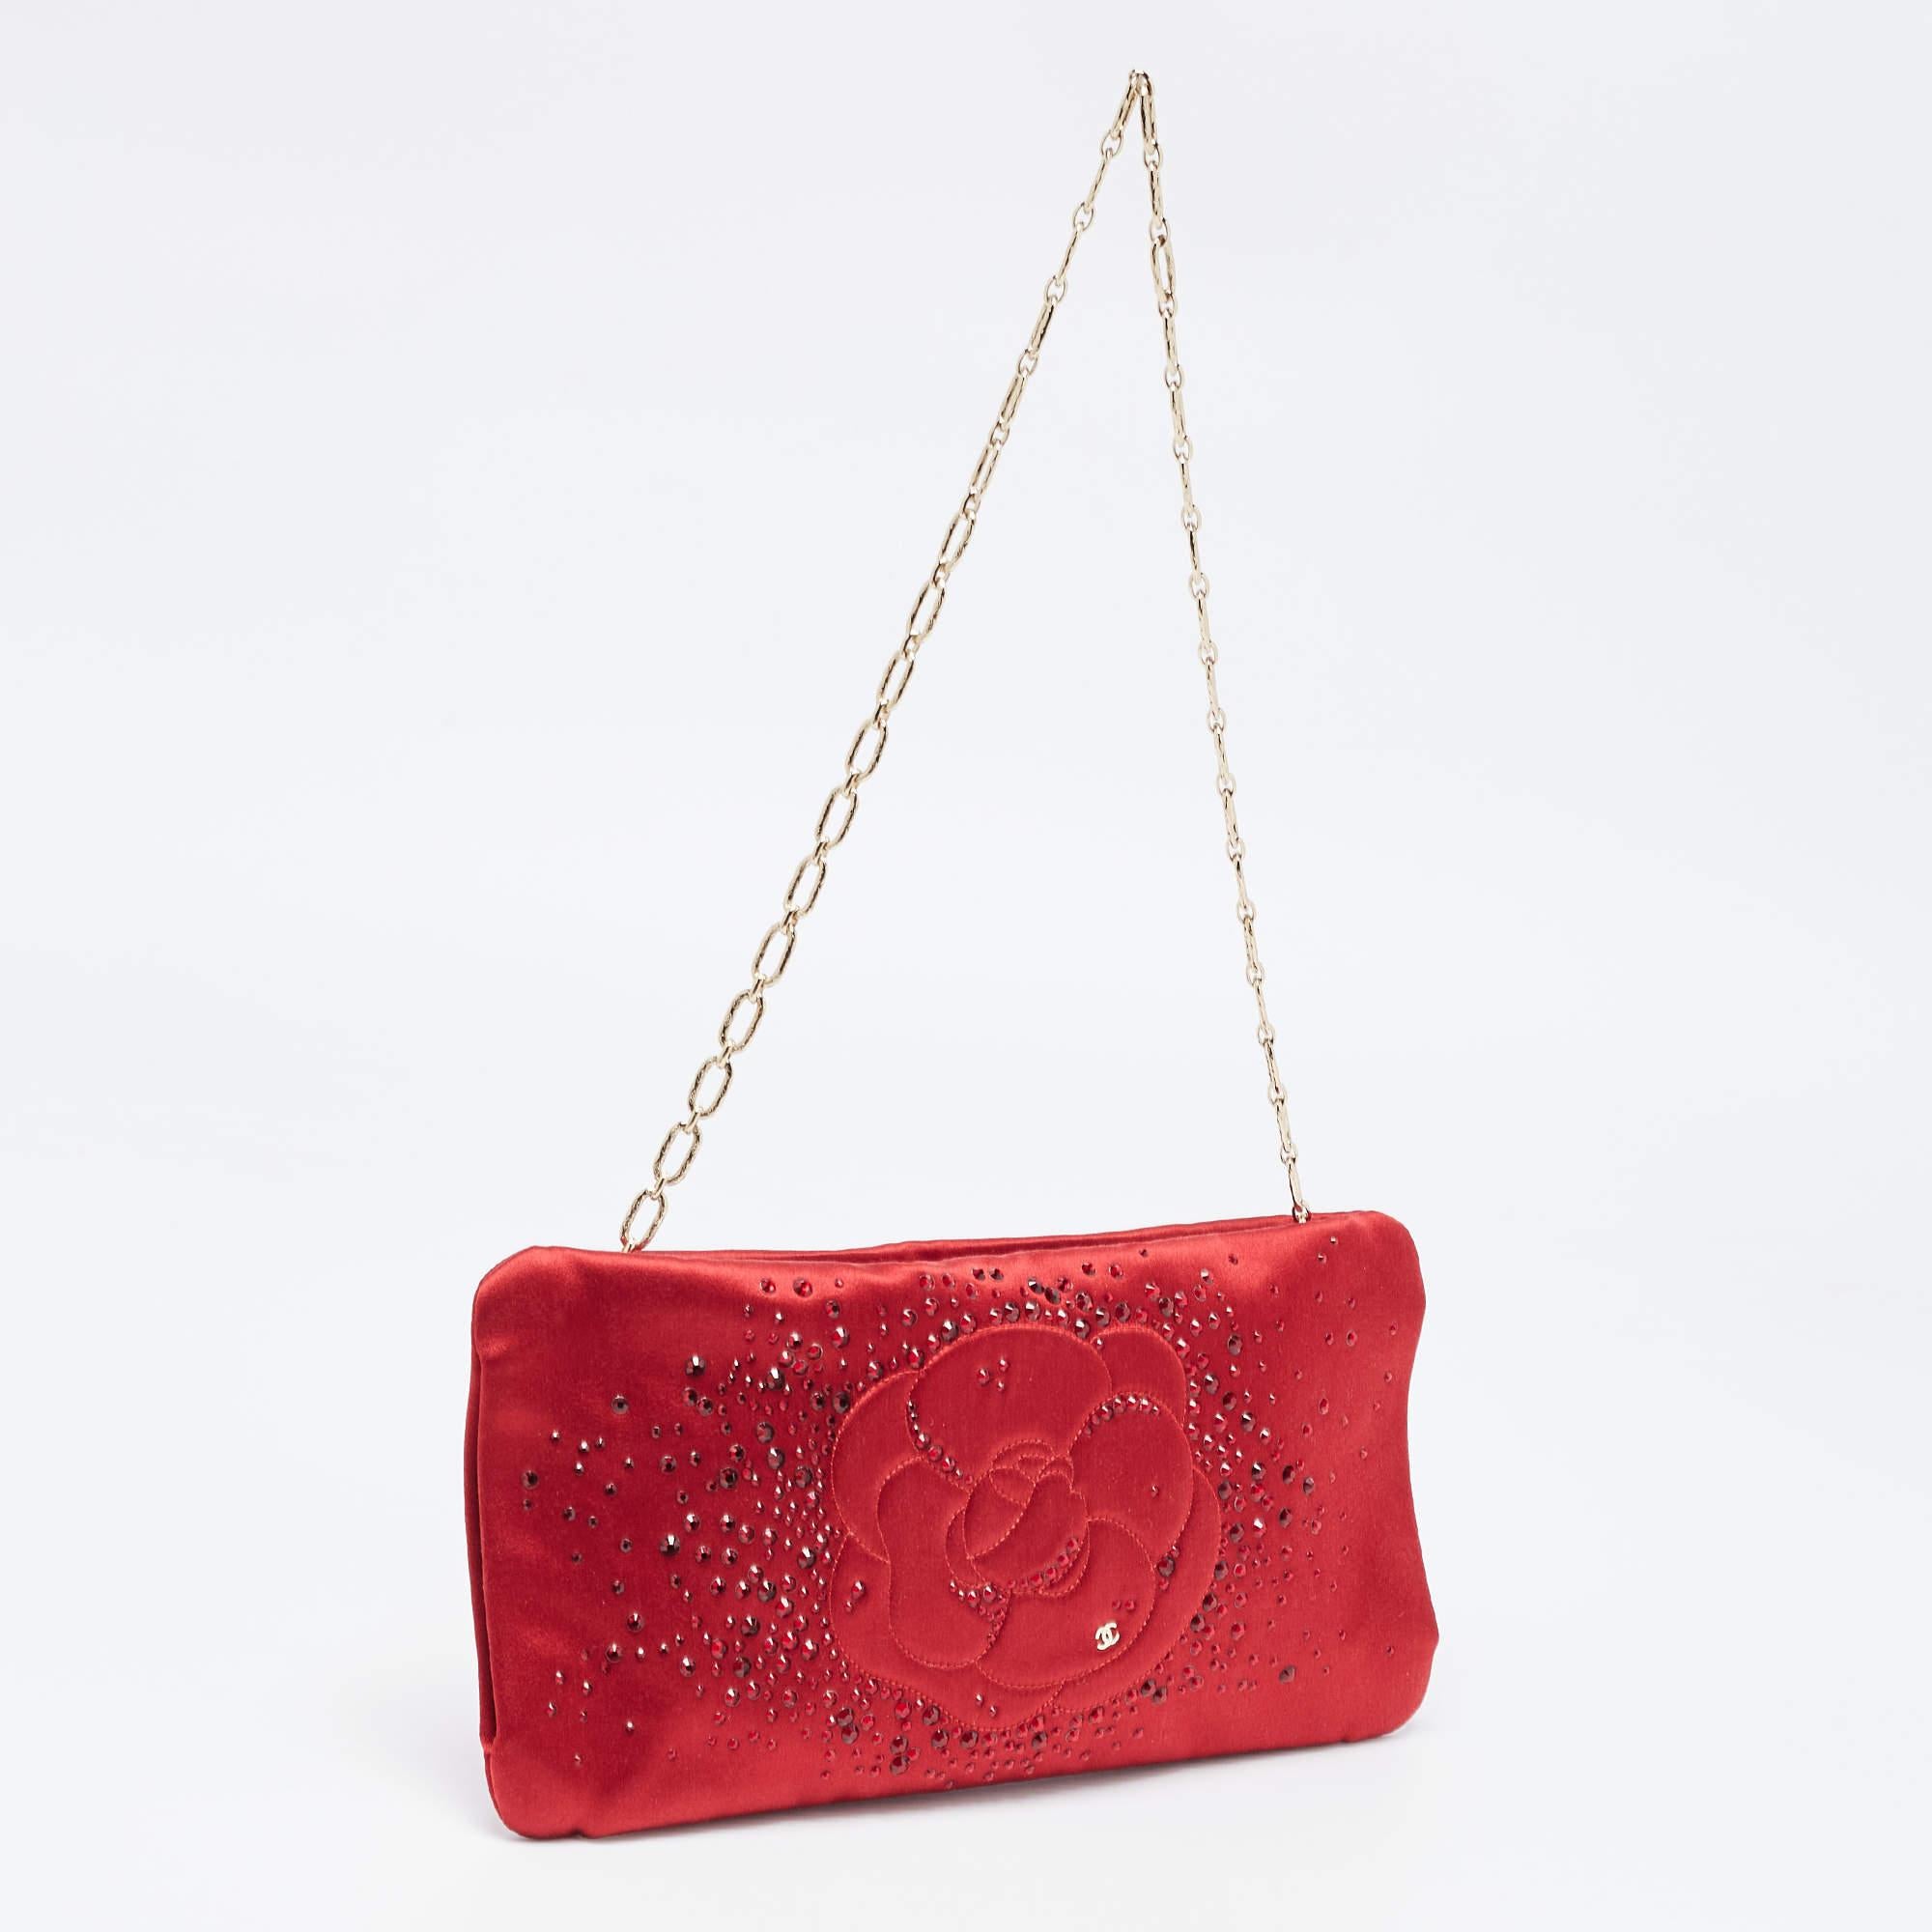 Chanel Red Satin Embellished Strass Camellia Chain Clutch In Good Condition In Dubai, Al Qouz 2